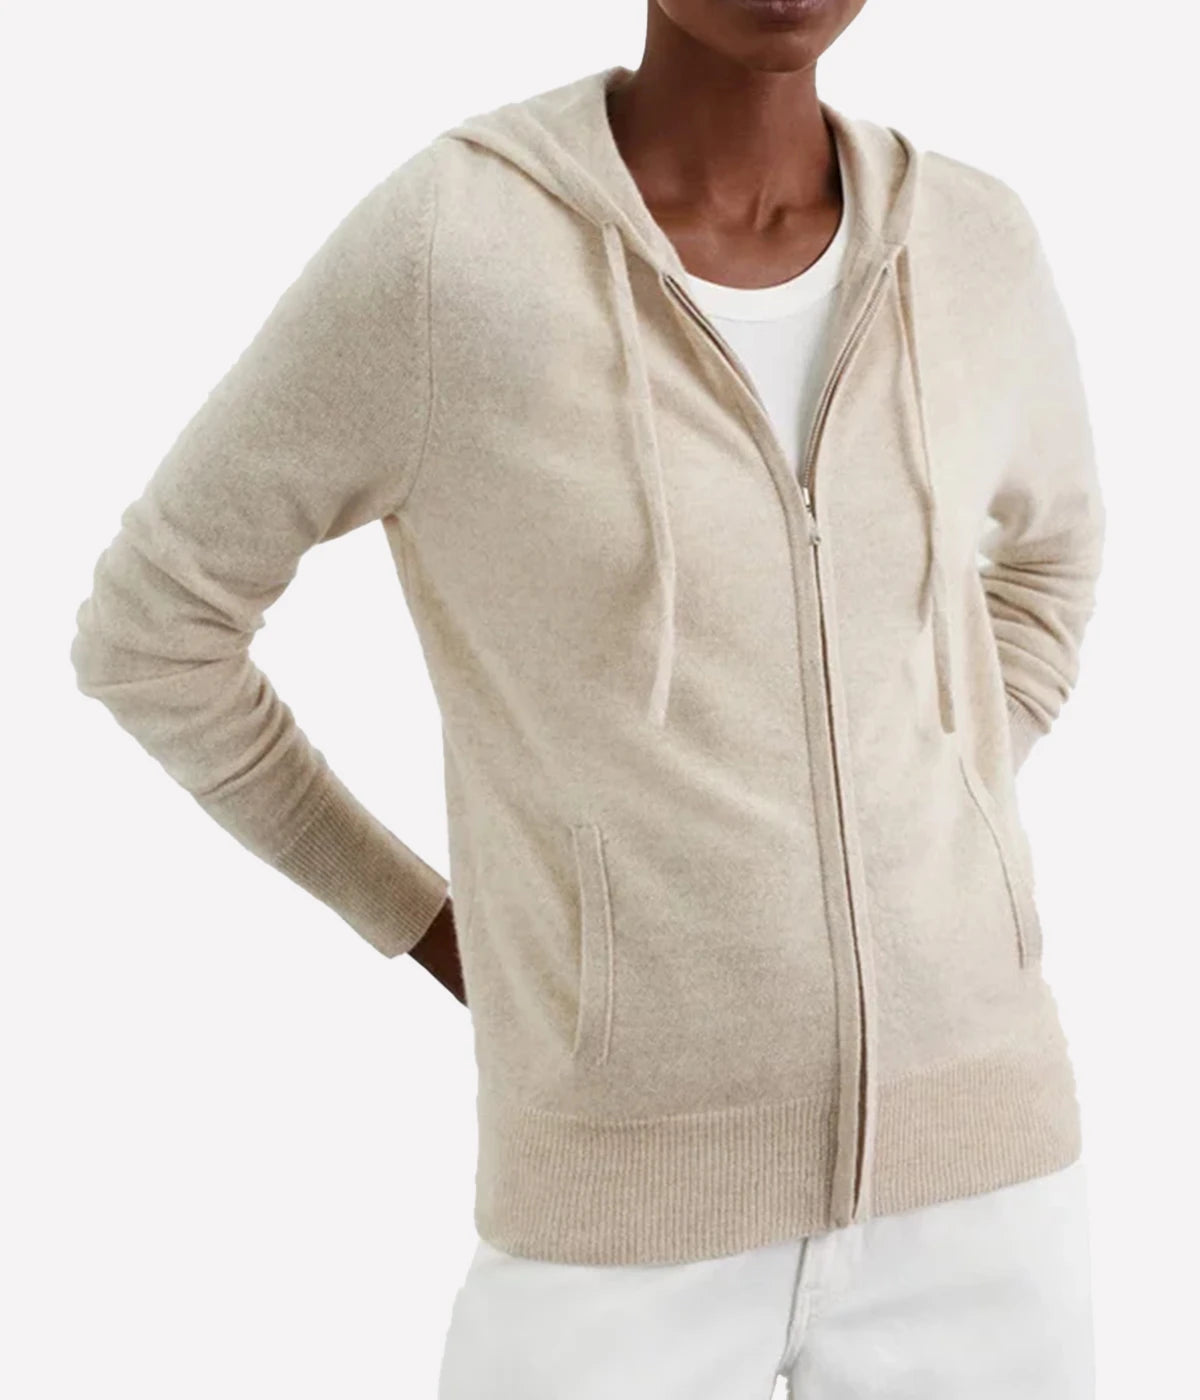 Cashmere Zip Hoodie in Natural Sand